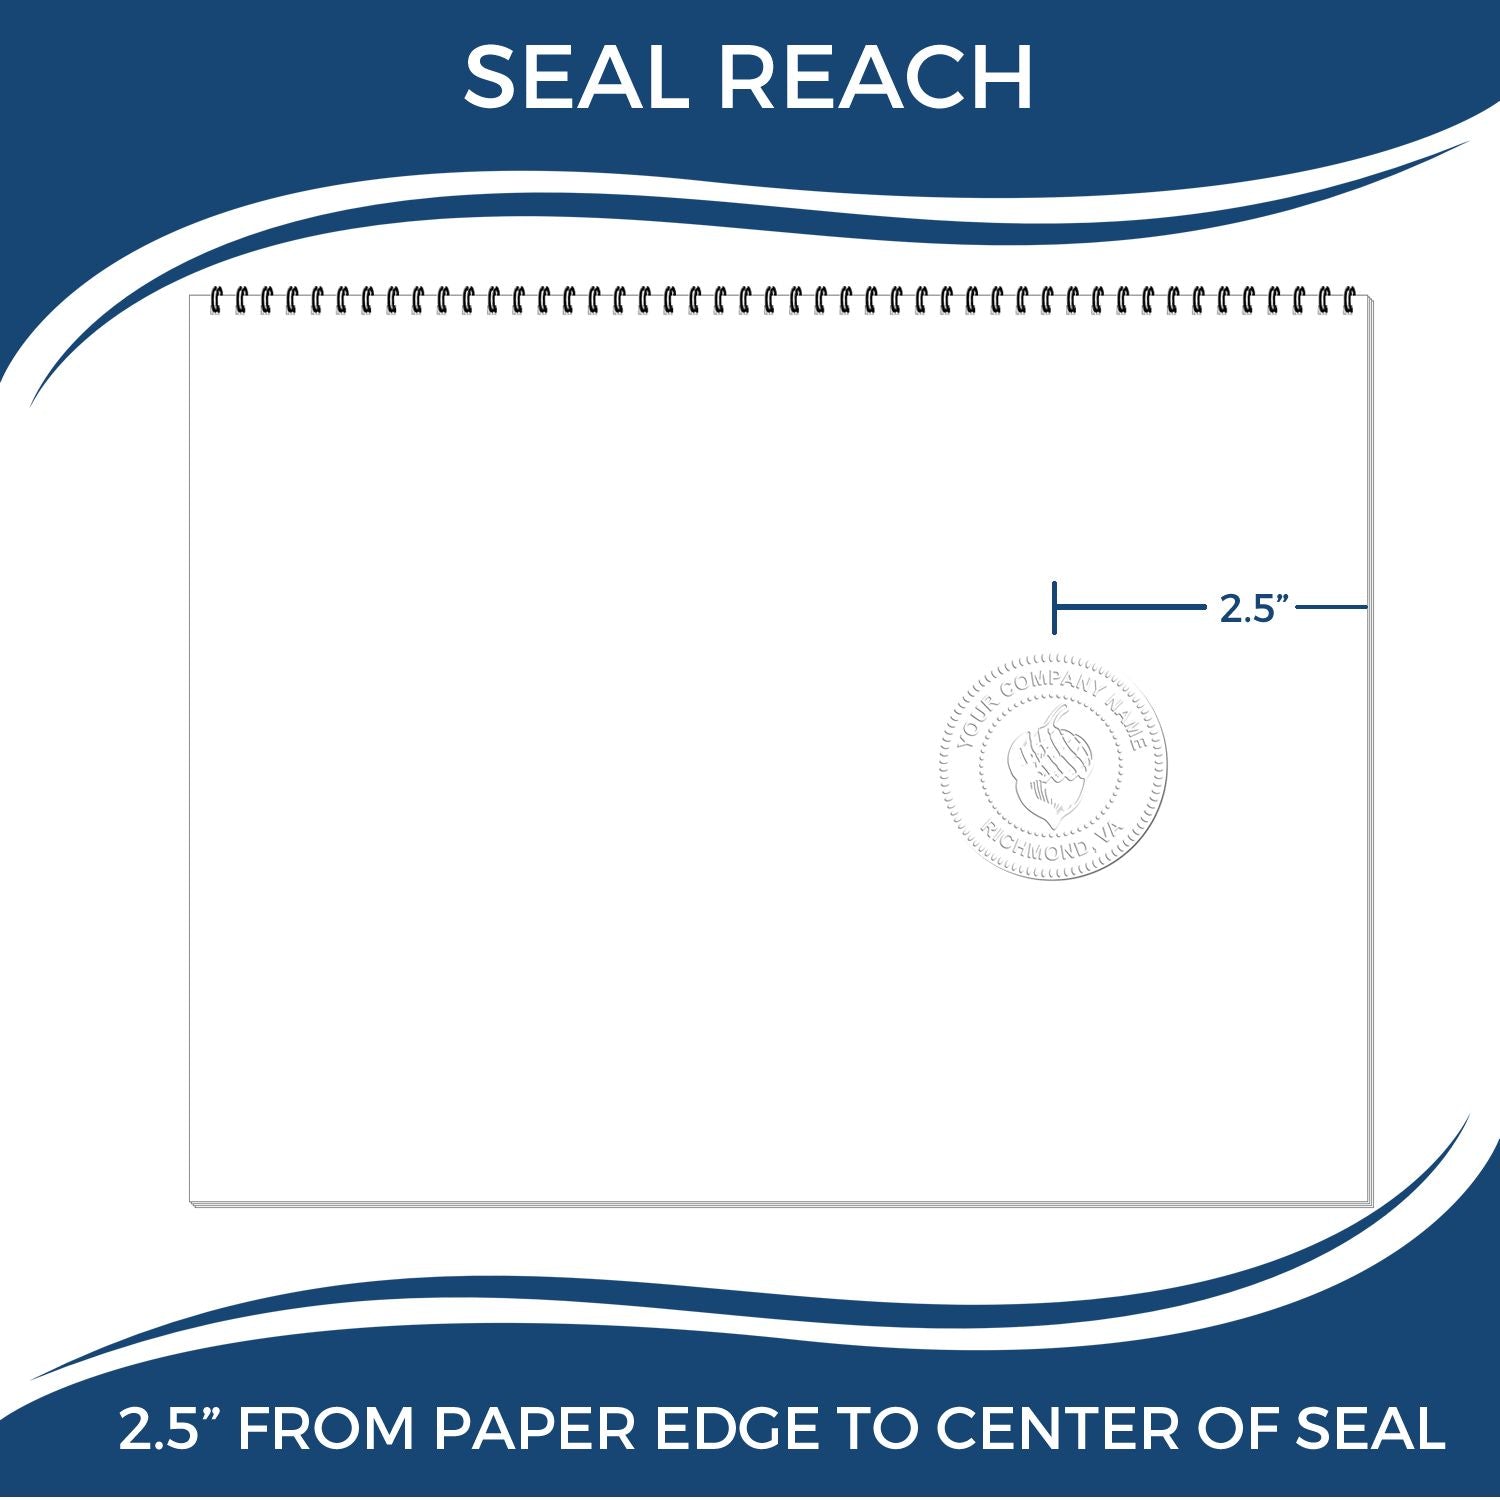 An infographic showing the seal reach which is represented by a ruler and a miniature seal image of the Long Reach Indiana Land Surveyor Seal